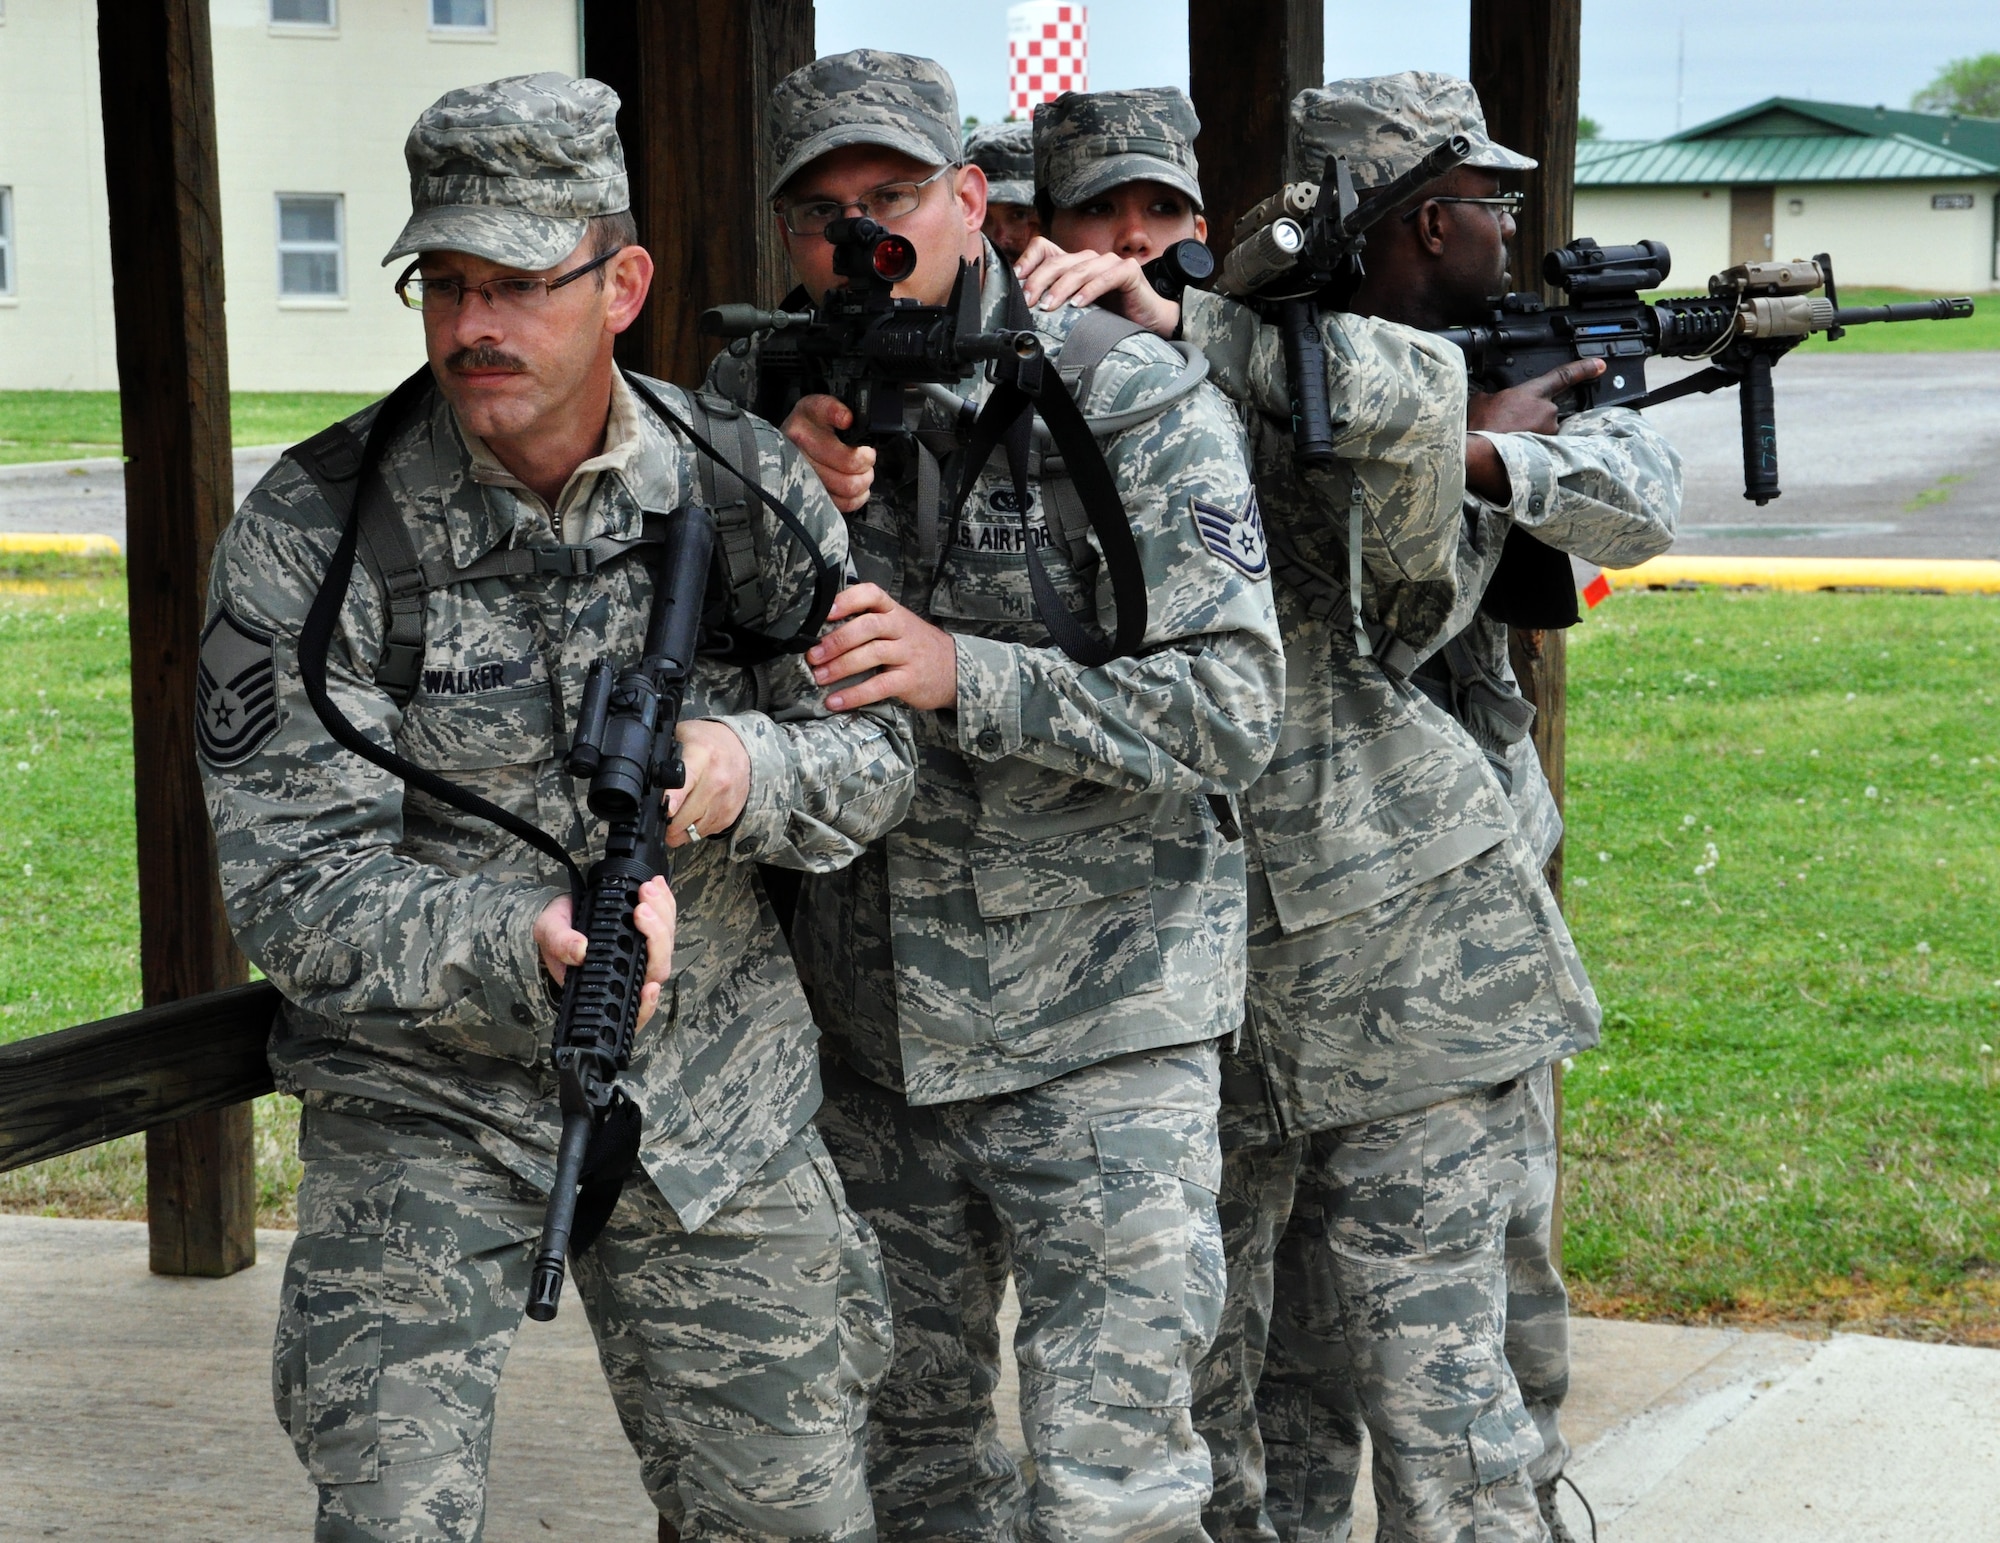 Members of the 931st Security Forces Squadron and 931st Civil Engineer Squadron practice room clearing procedures at Camp Gruber Training Center, Okla., April 15, 2015. More than 80 members of the two squadrons participated in ten days of combat skills training at Camp Gruber, which included land navigation, weapons training, tactical movements, convoy operations, base defense, room clearing procedures, foot patrols, military operations on urban terrain (MOUT) and combat lifesaving.  (U.S. Air Force photo by Capt. Zach Anderson)
